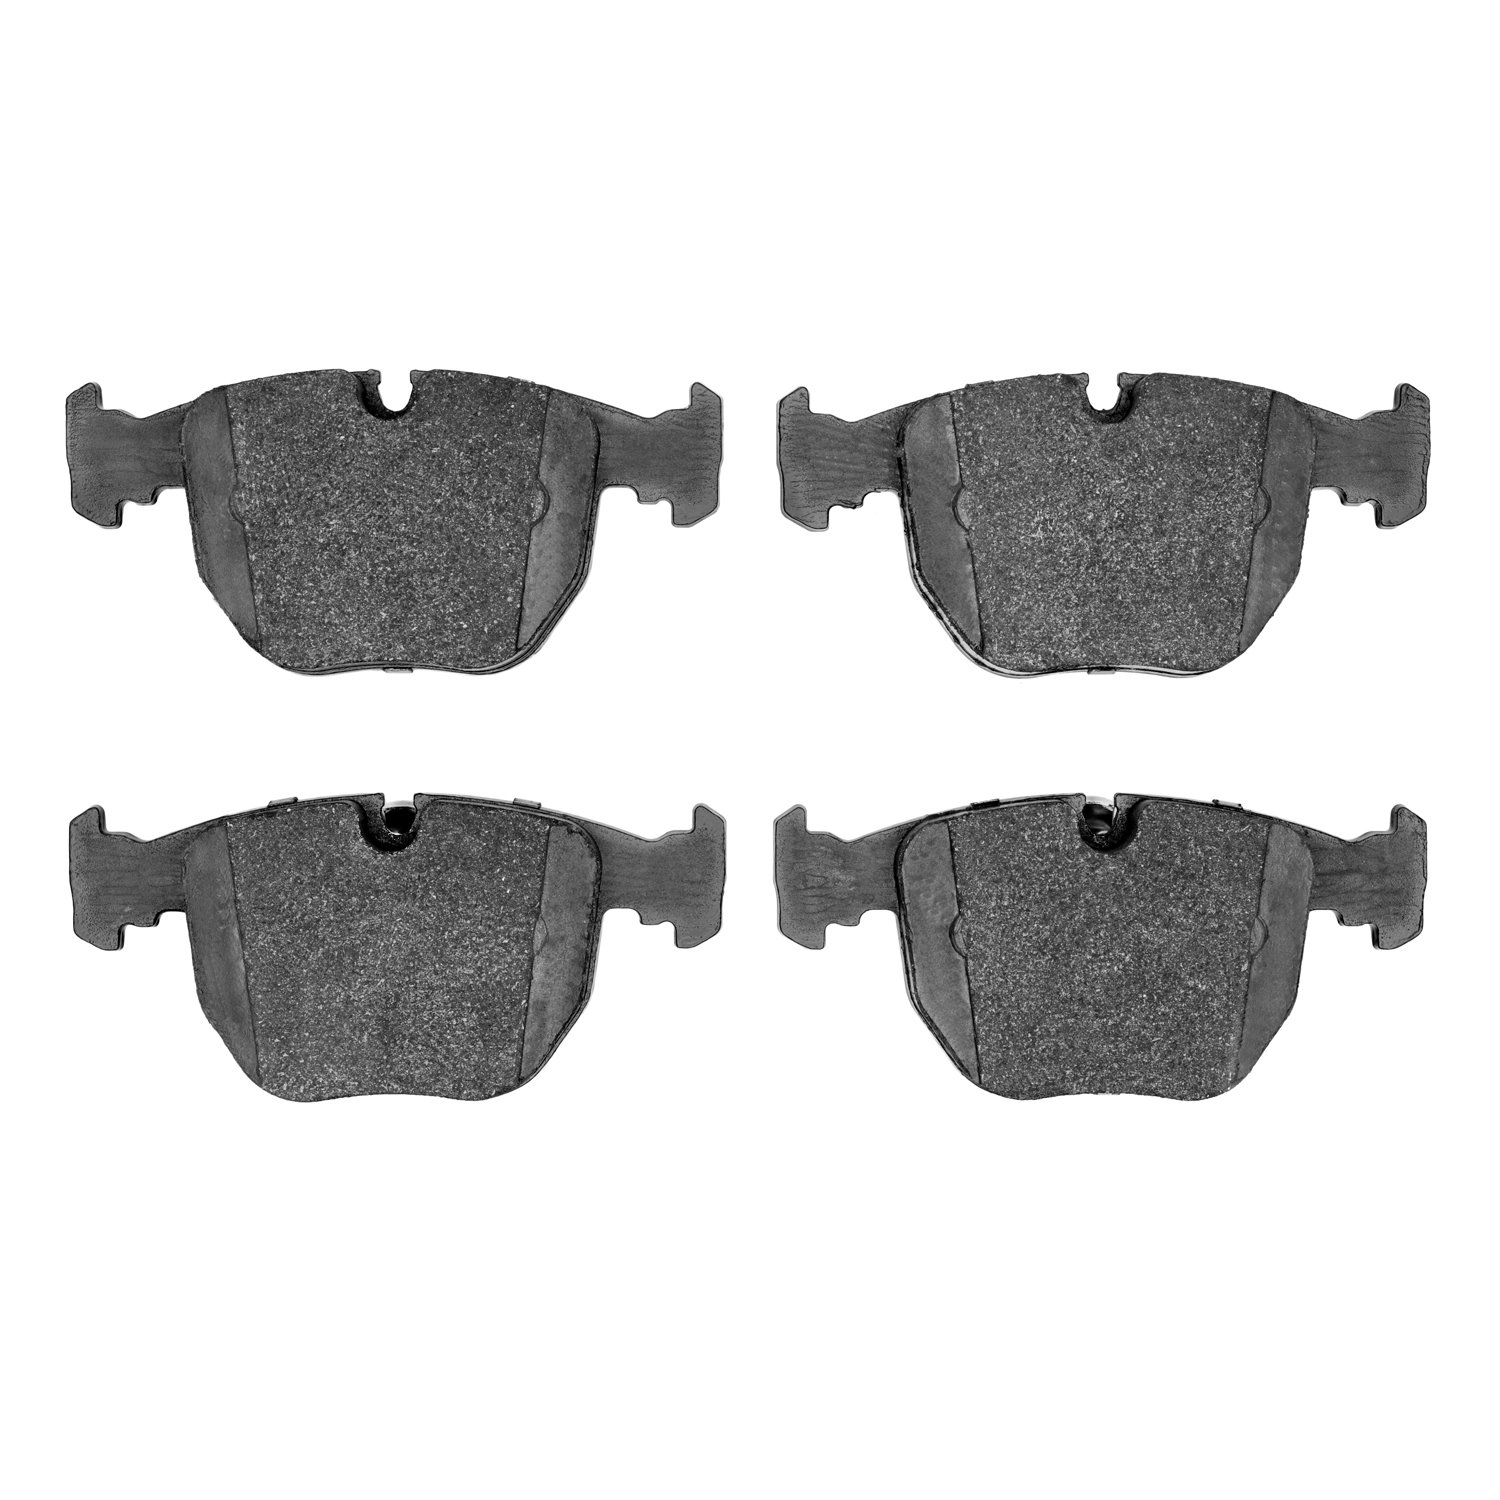 1551-0681-00 5000 Advanced Low-Metallic Brake Pads, 1995-2006 Multiple Makes/Models, Position: Front